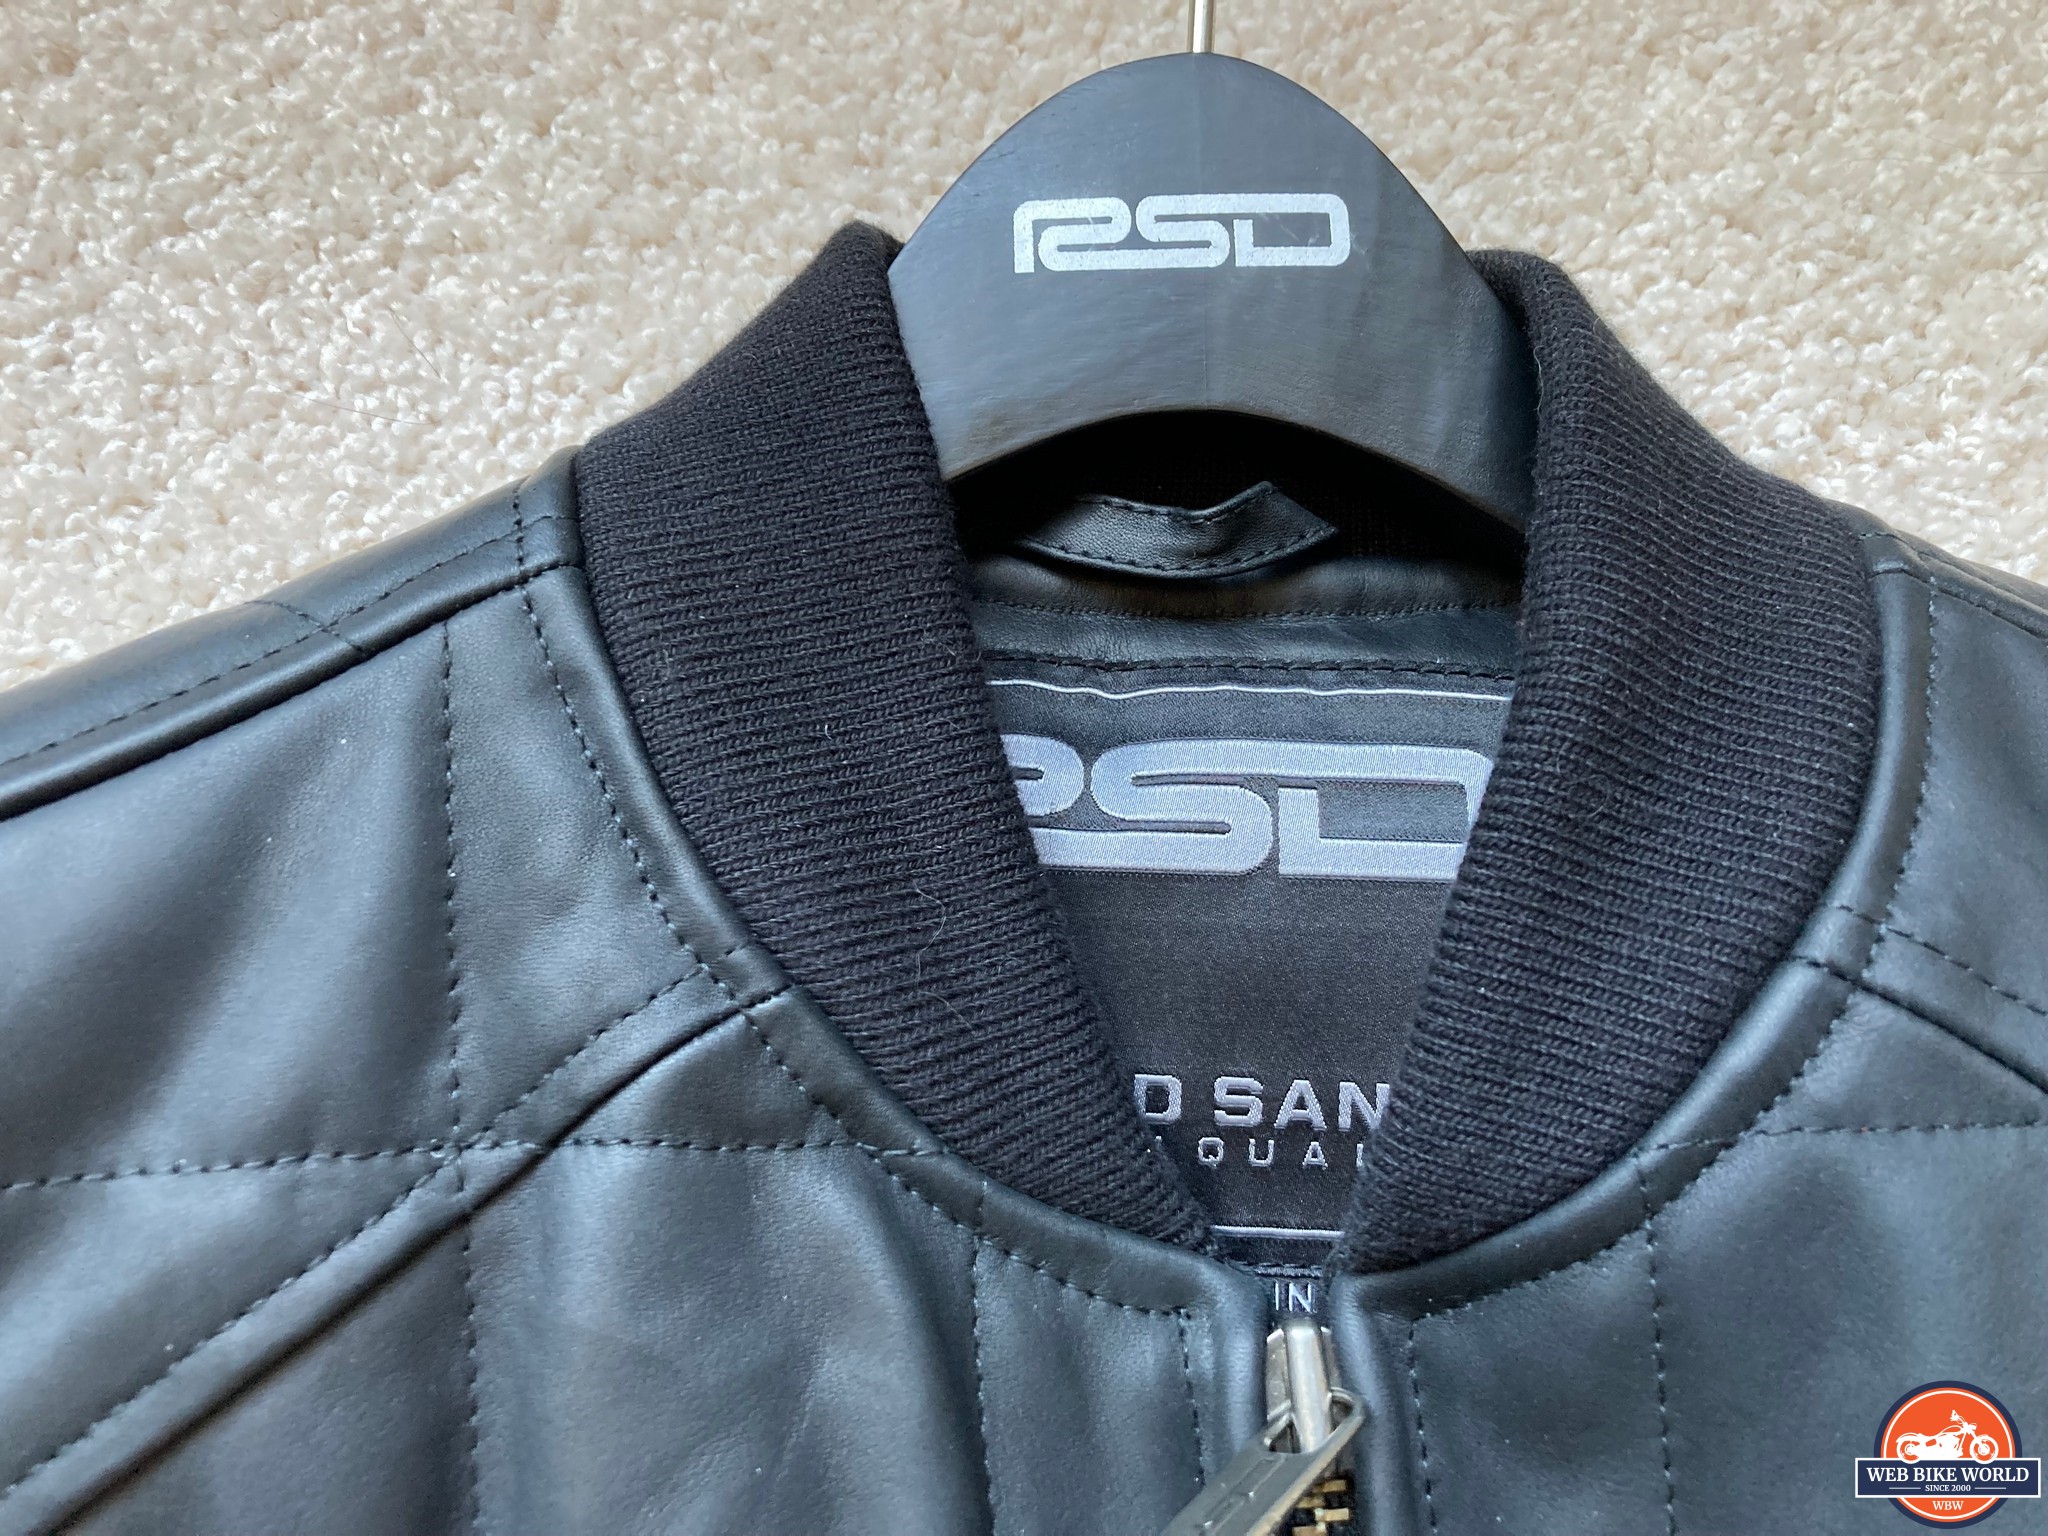 Closeup of the collar on the jacket